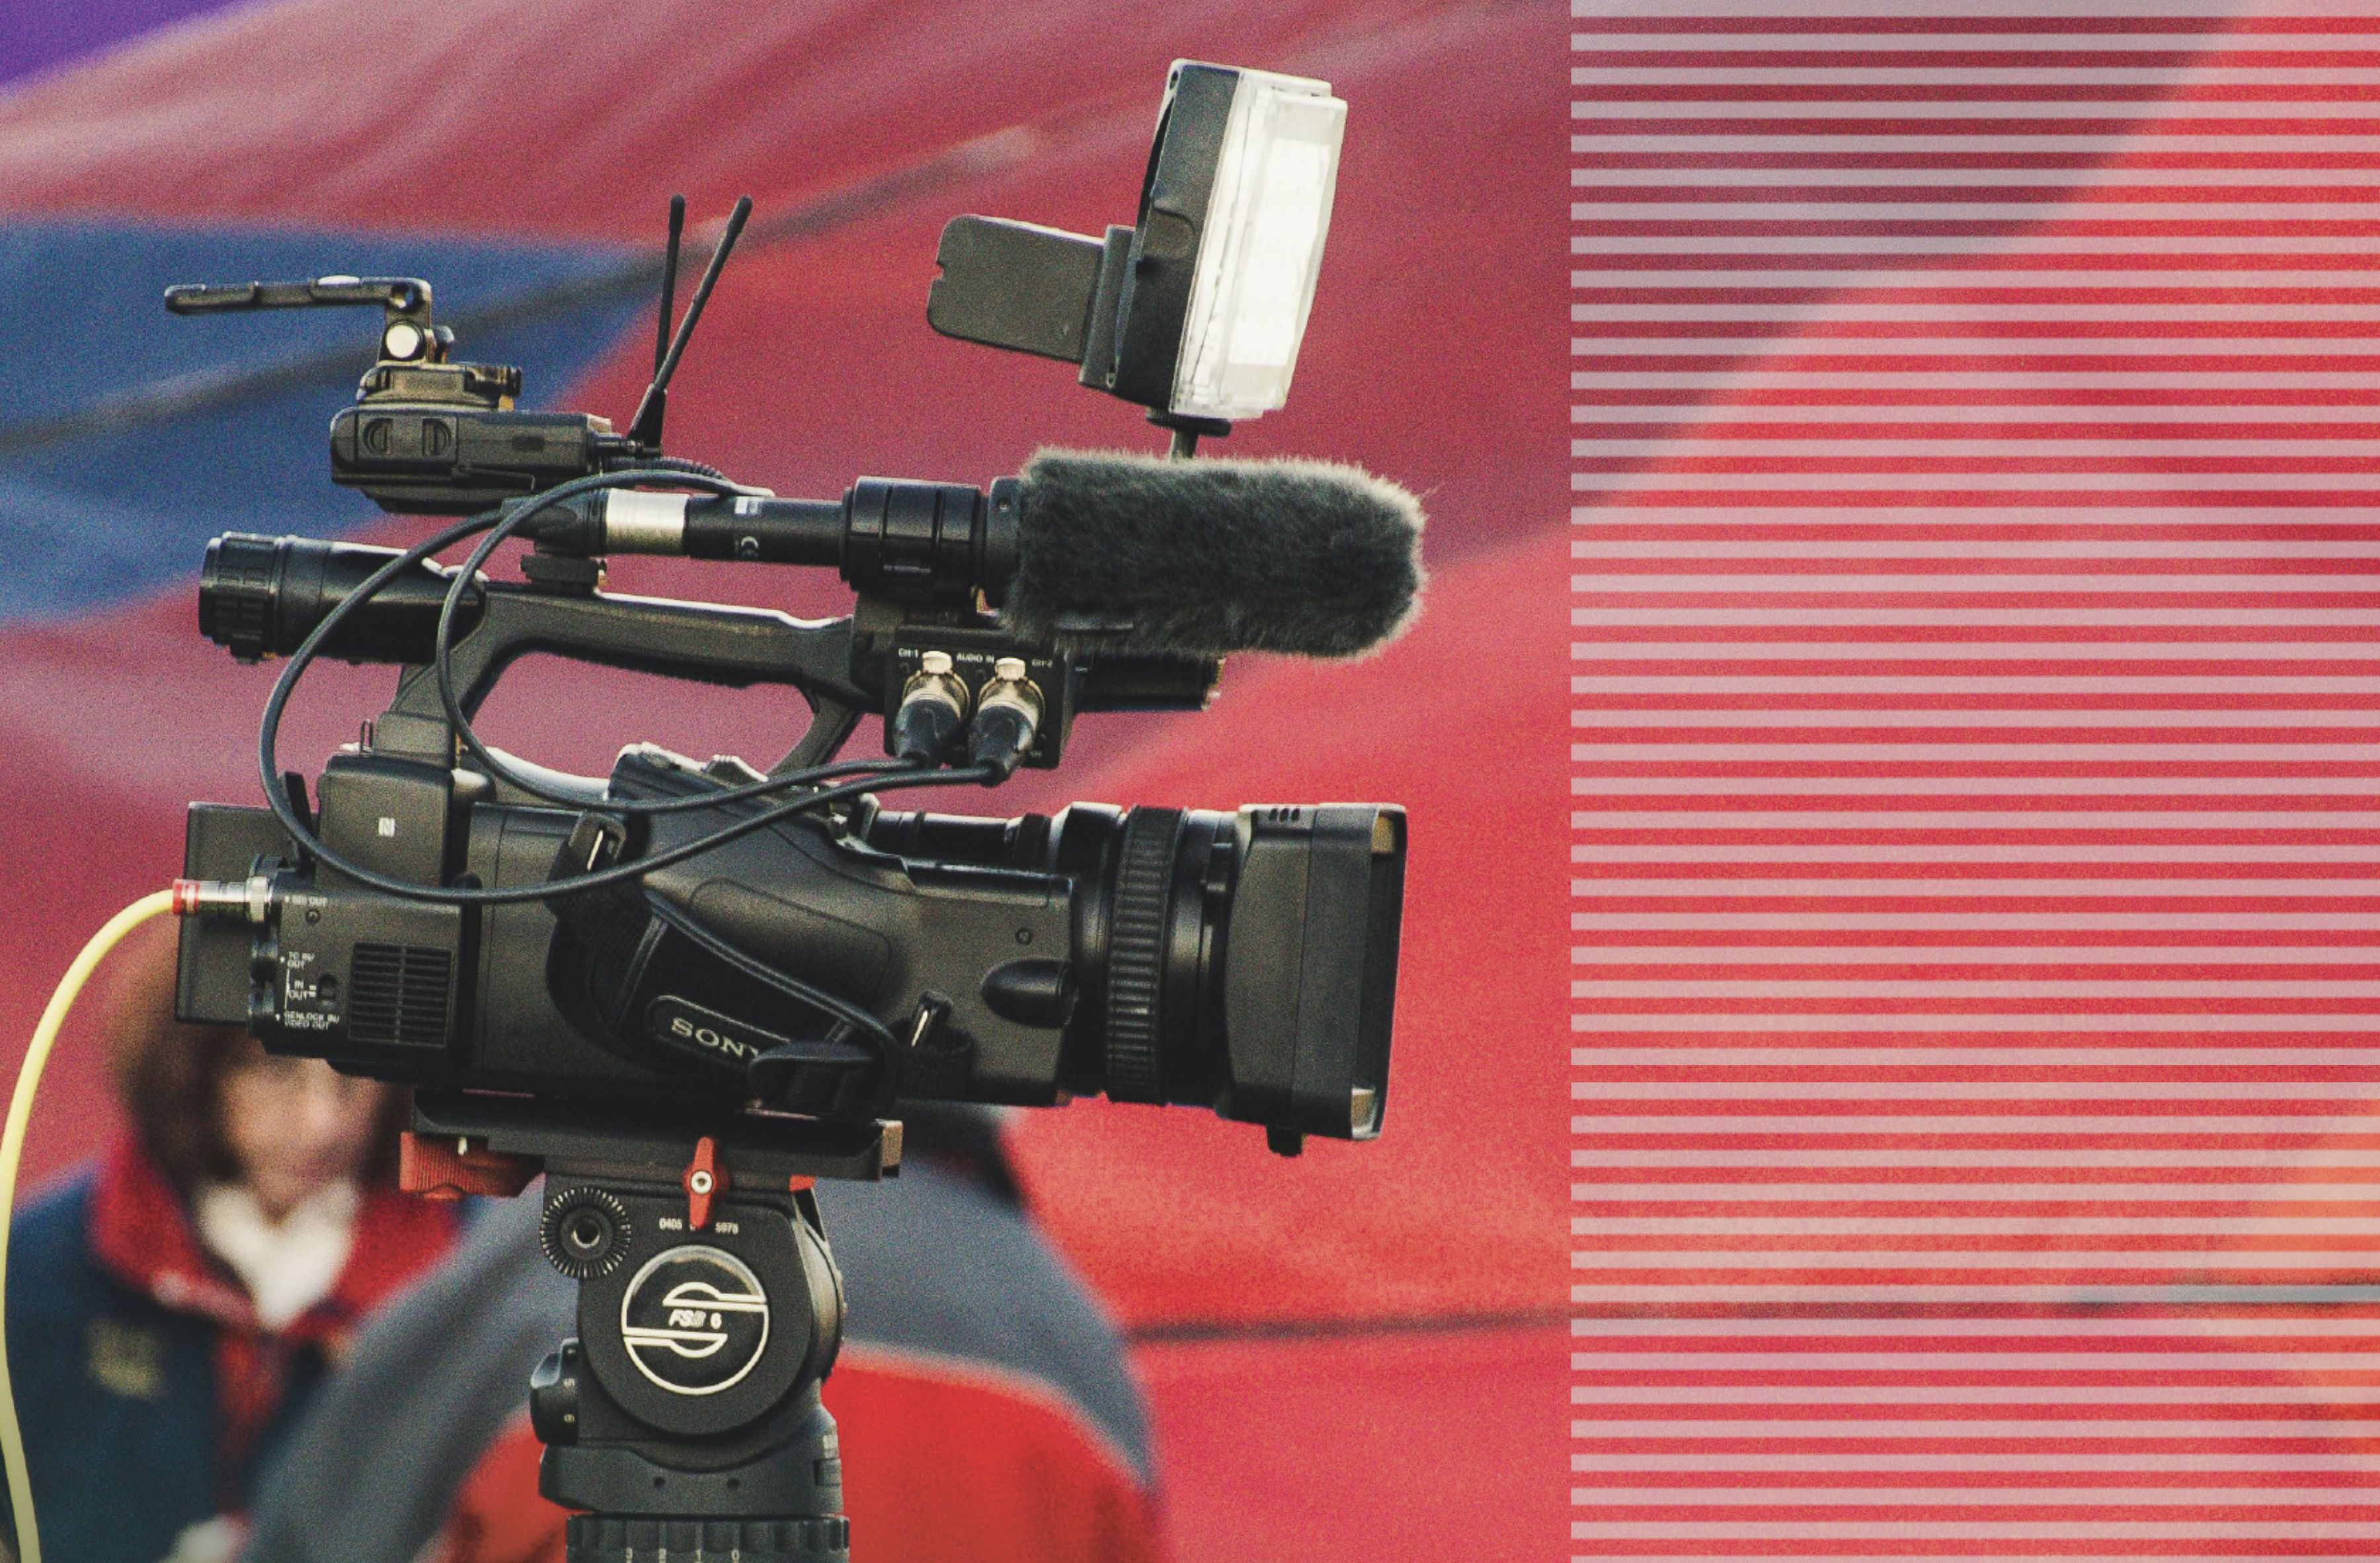 A photo of a news camera with a red background